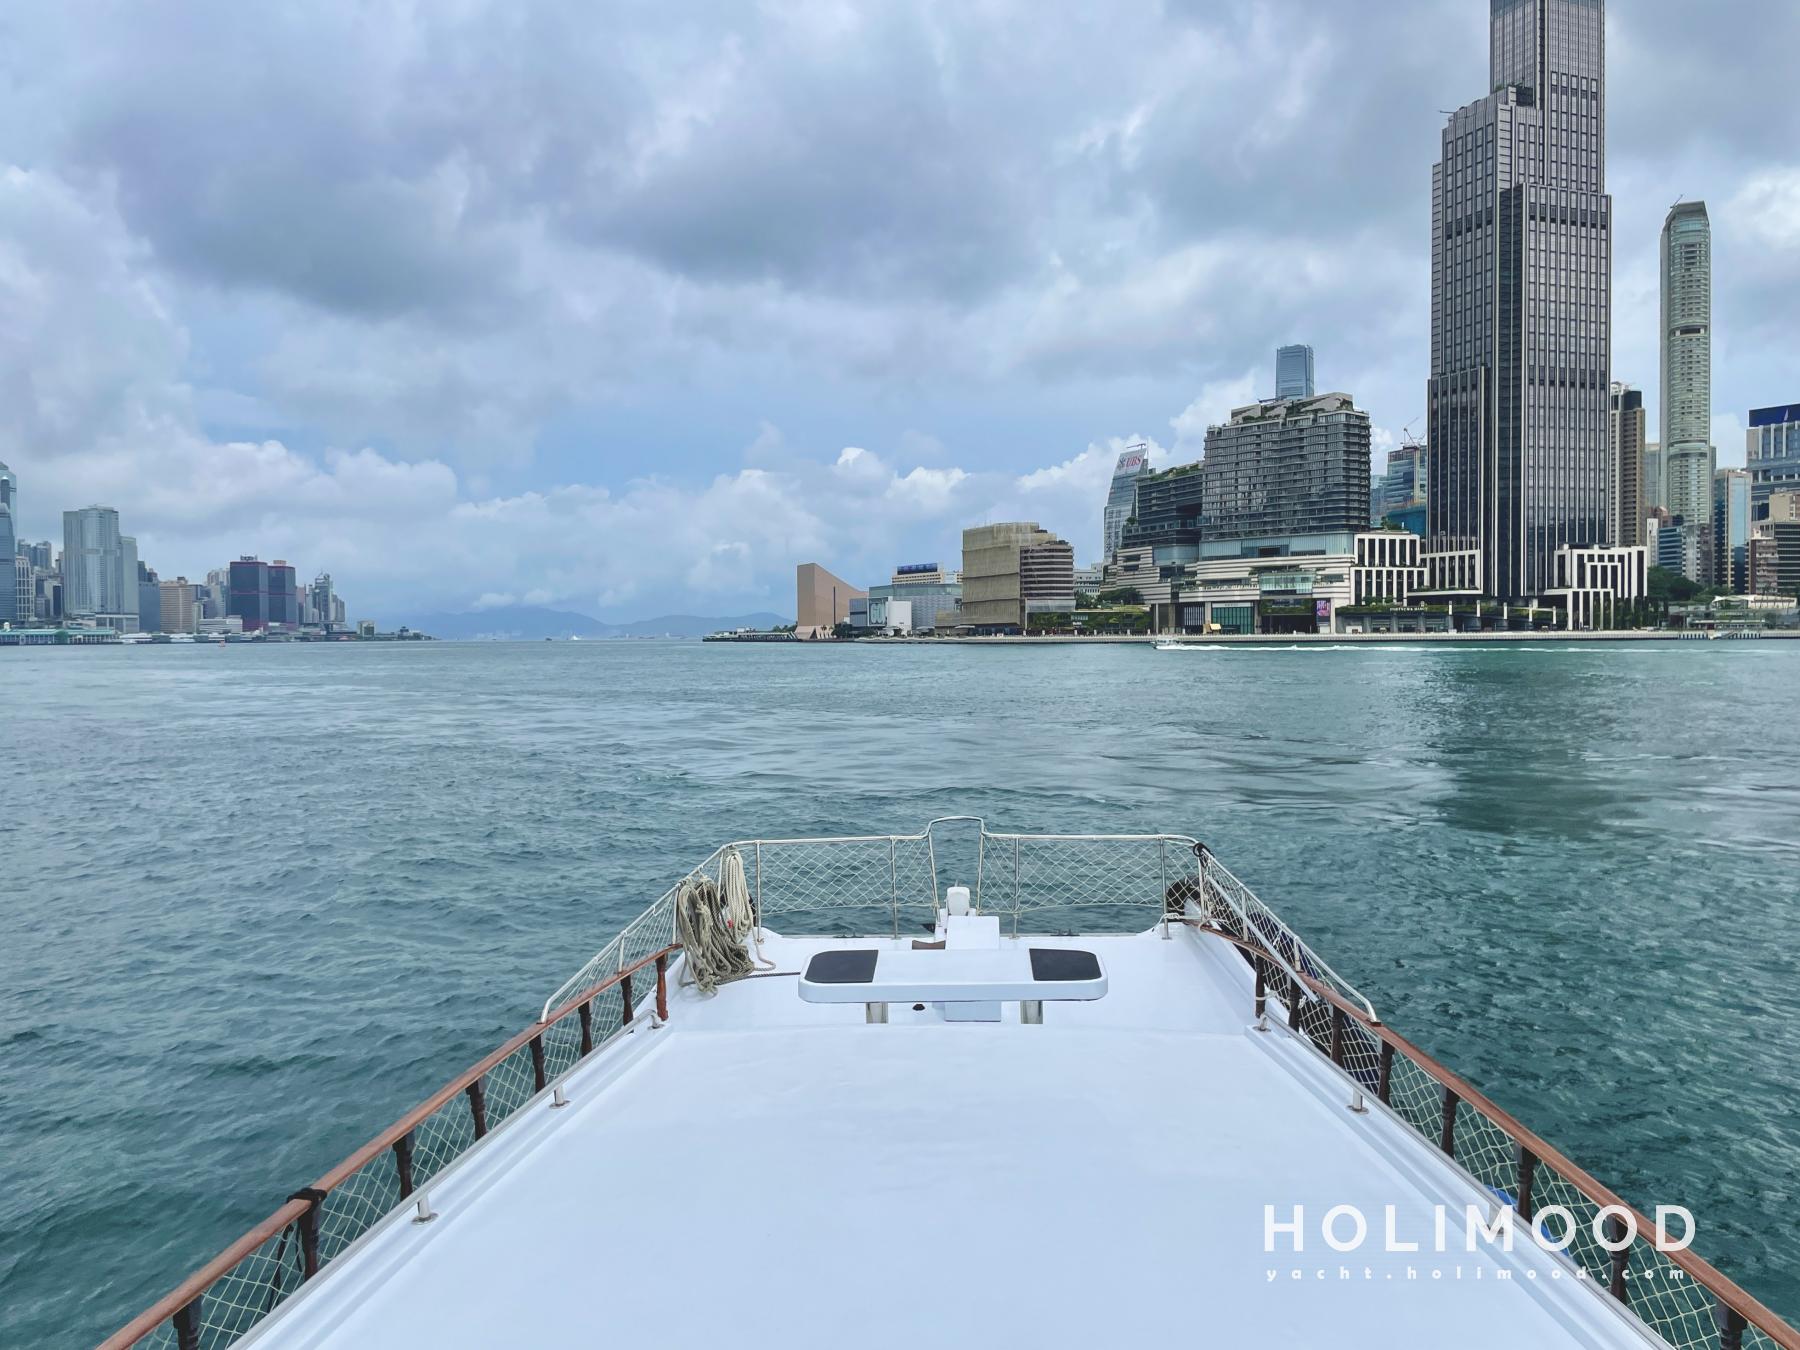 LT01 Pick up & drop off at Victoria Harbour , Spacious, from $428/ppl Boat Party All Inclusive Package (recommended for weekdays) 20